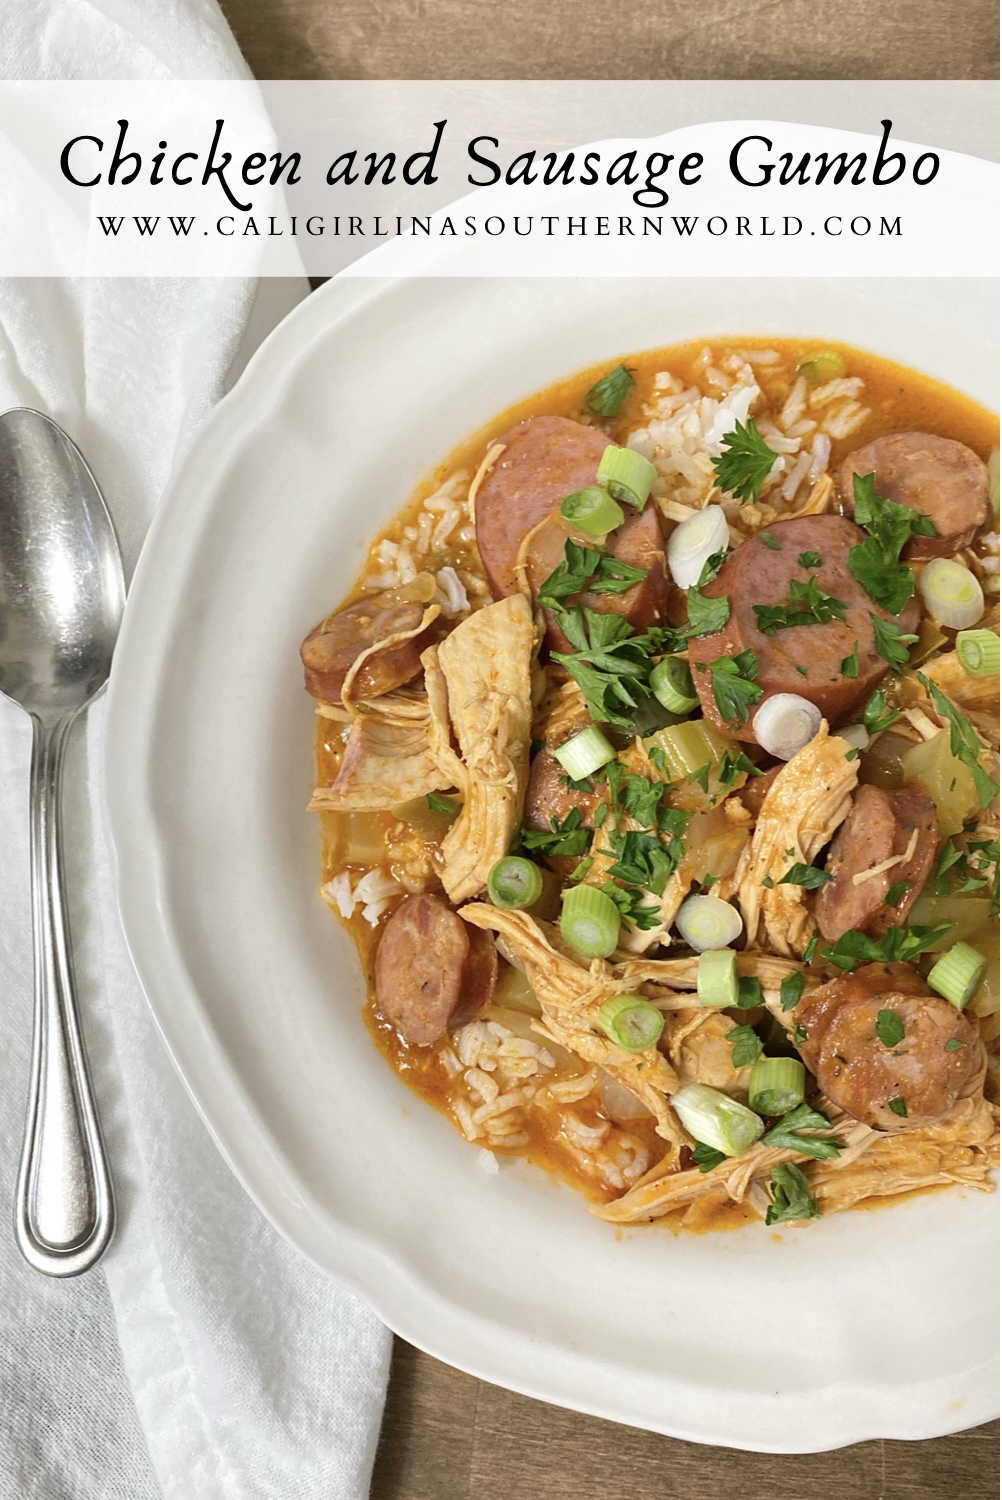 Pinterest Pin for Chicken and Sausage Gumbo